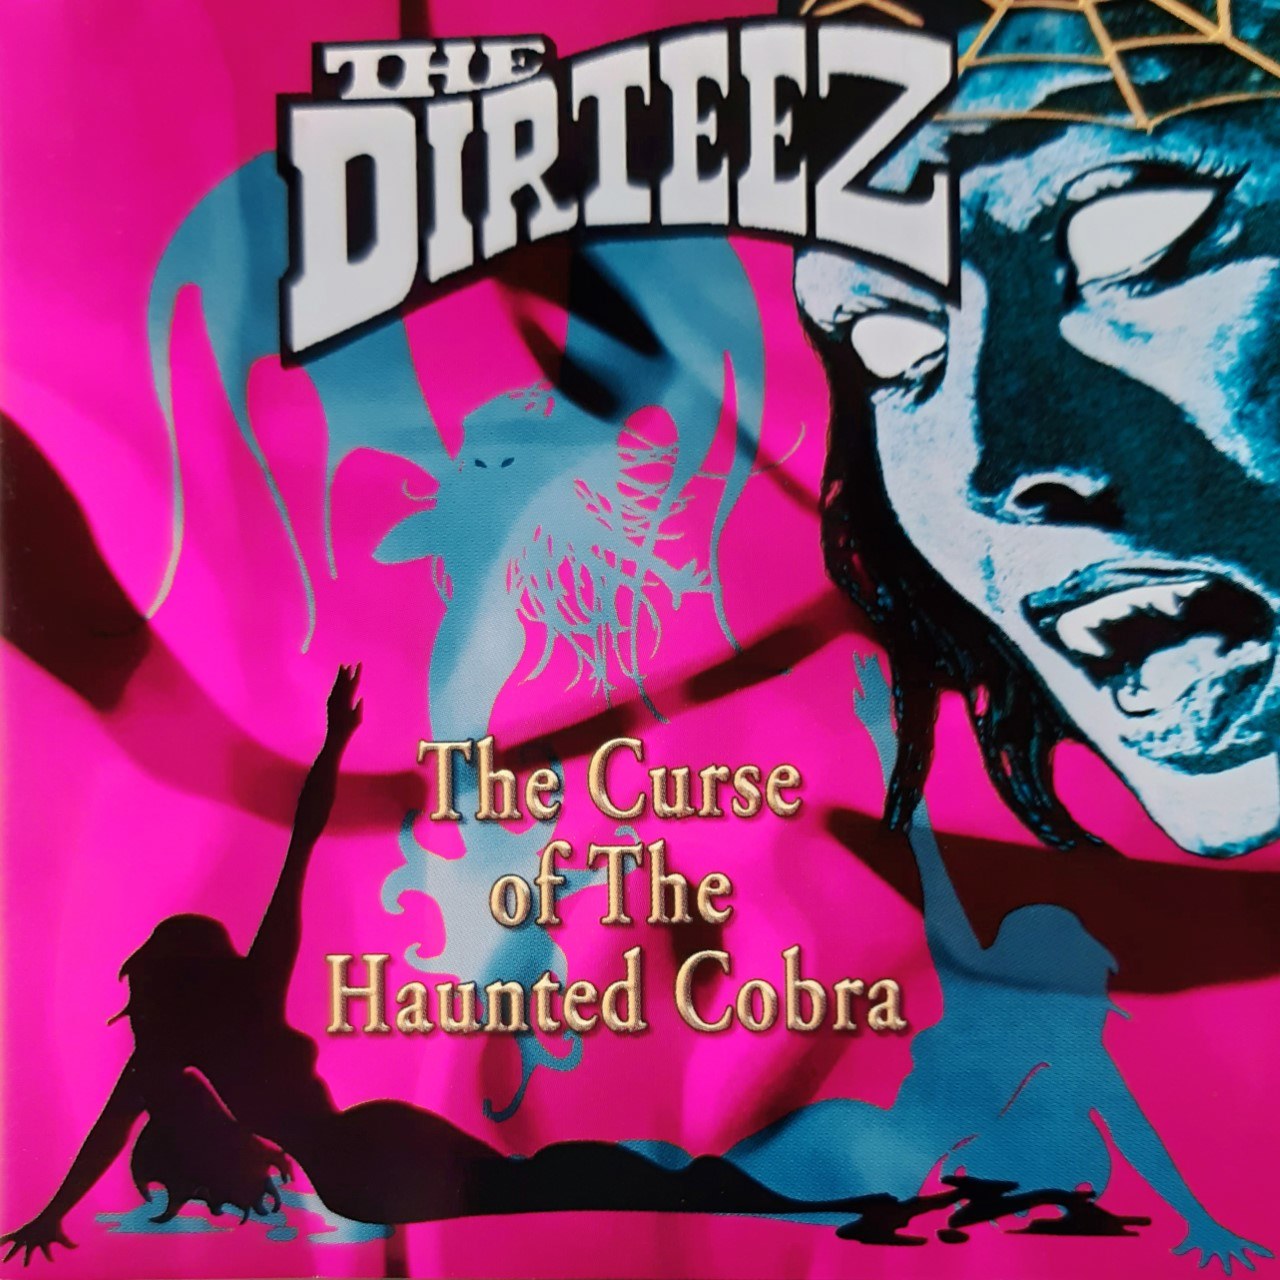 The Curse of the Haunted Cobra